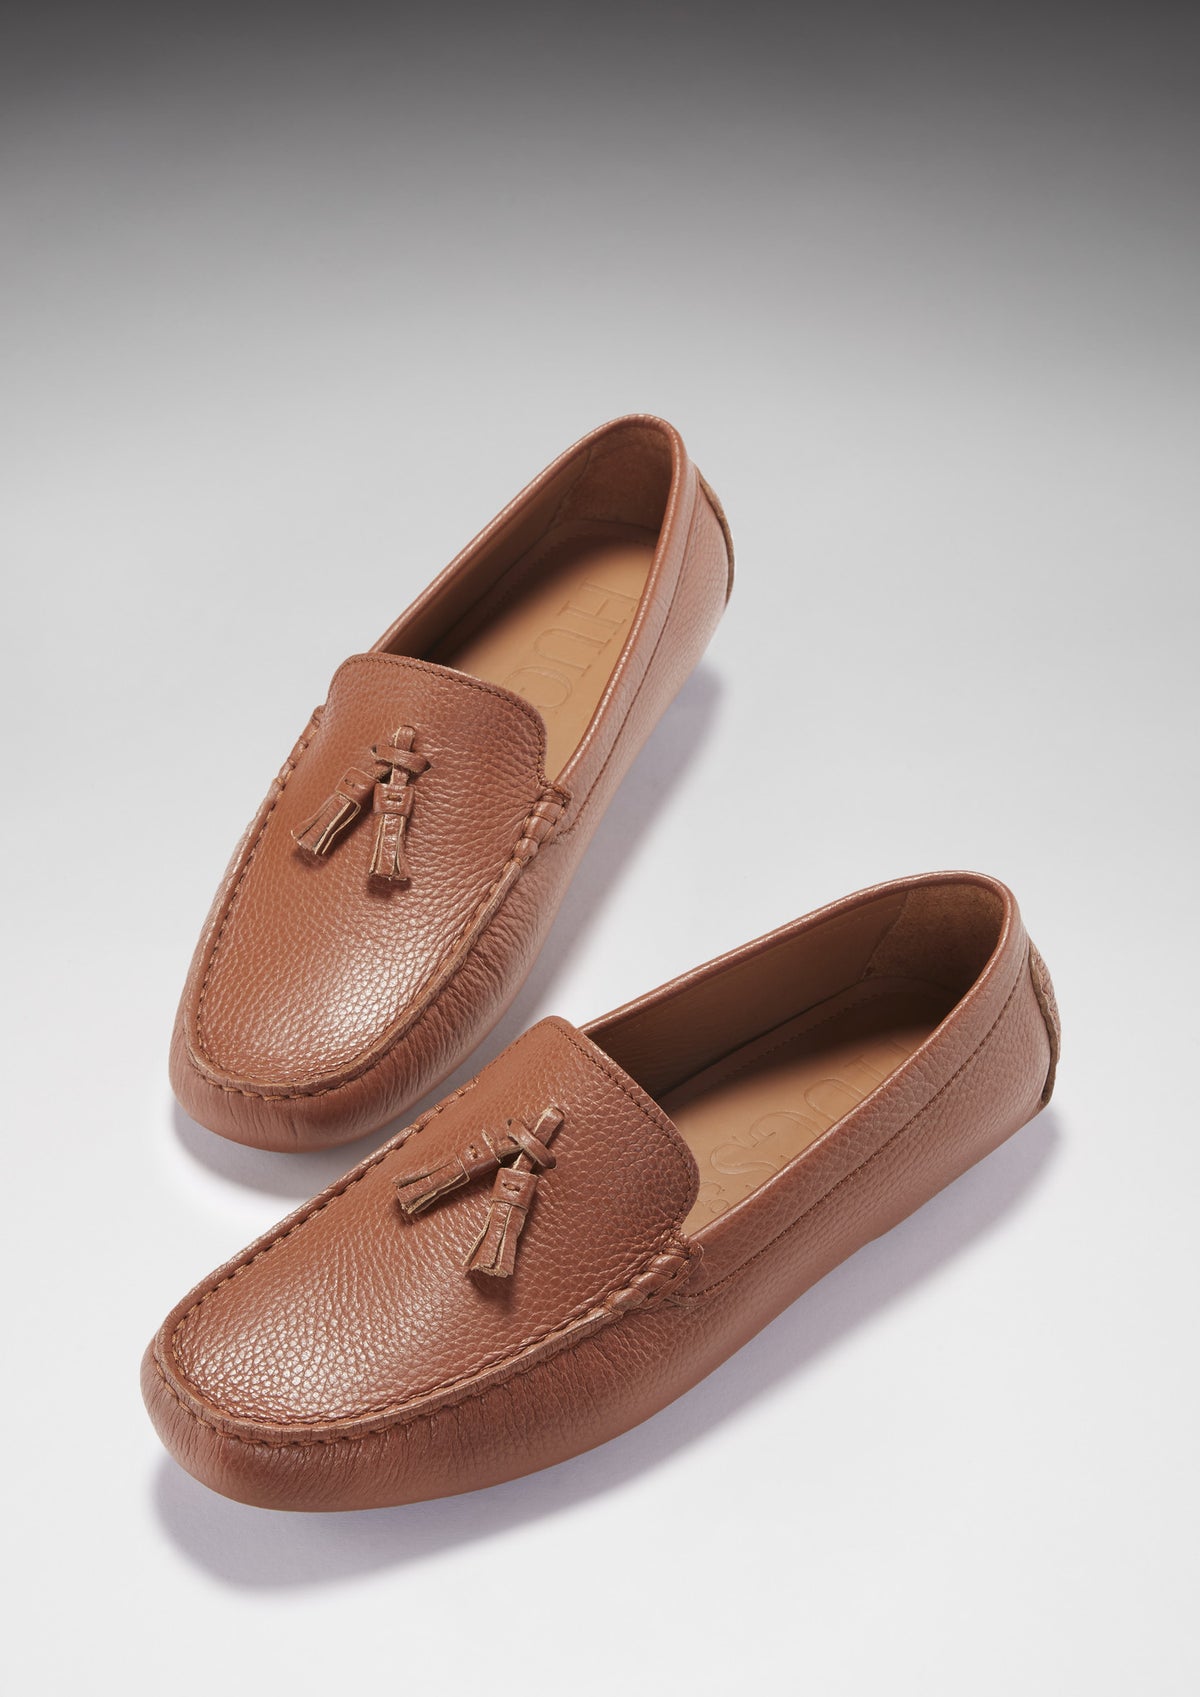 Men's driving loafers - Hugs & Co.